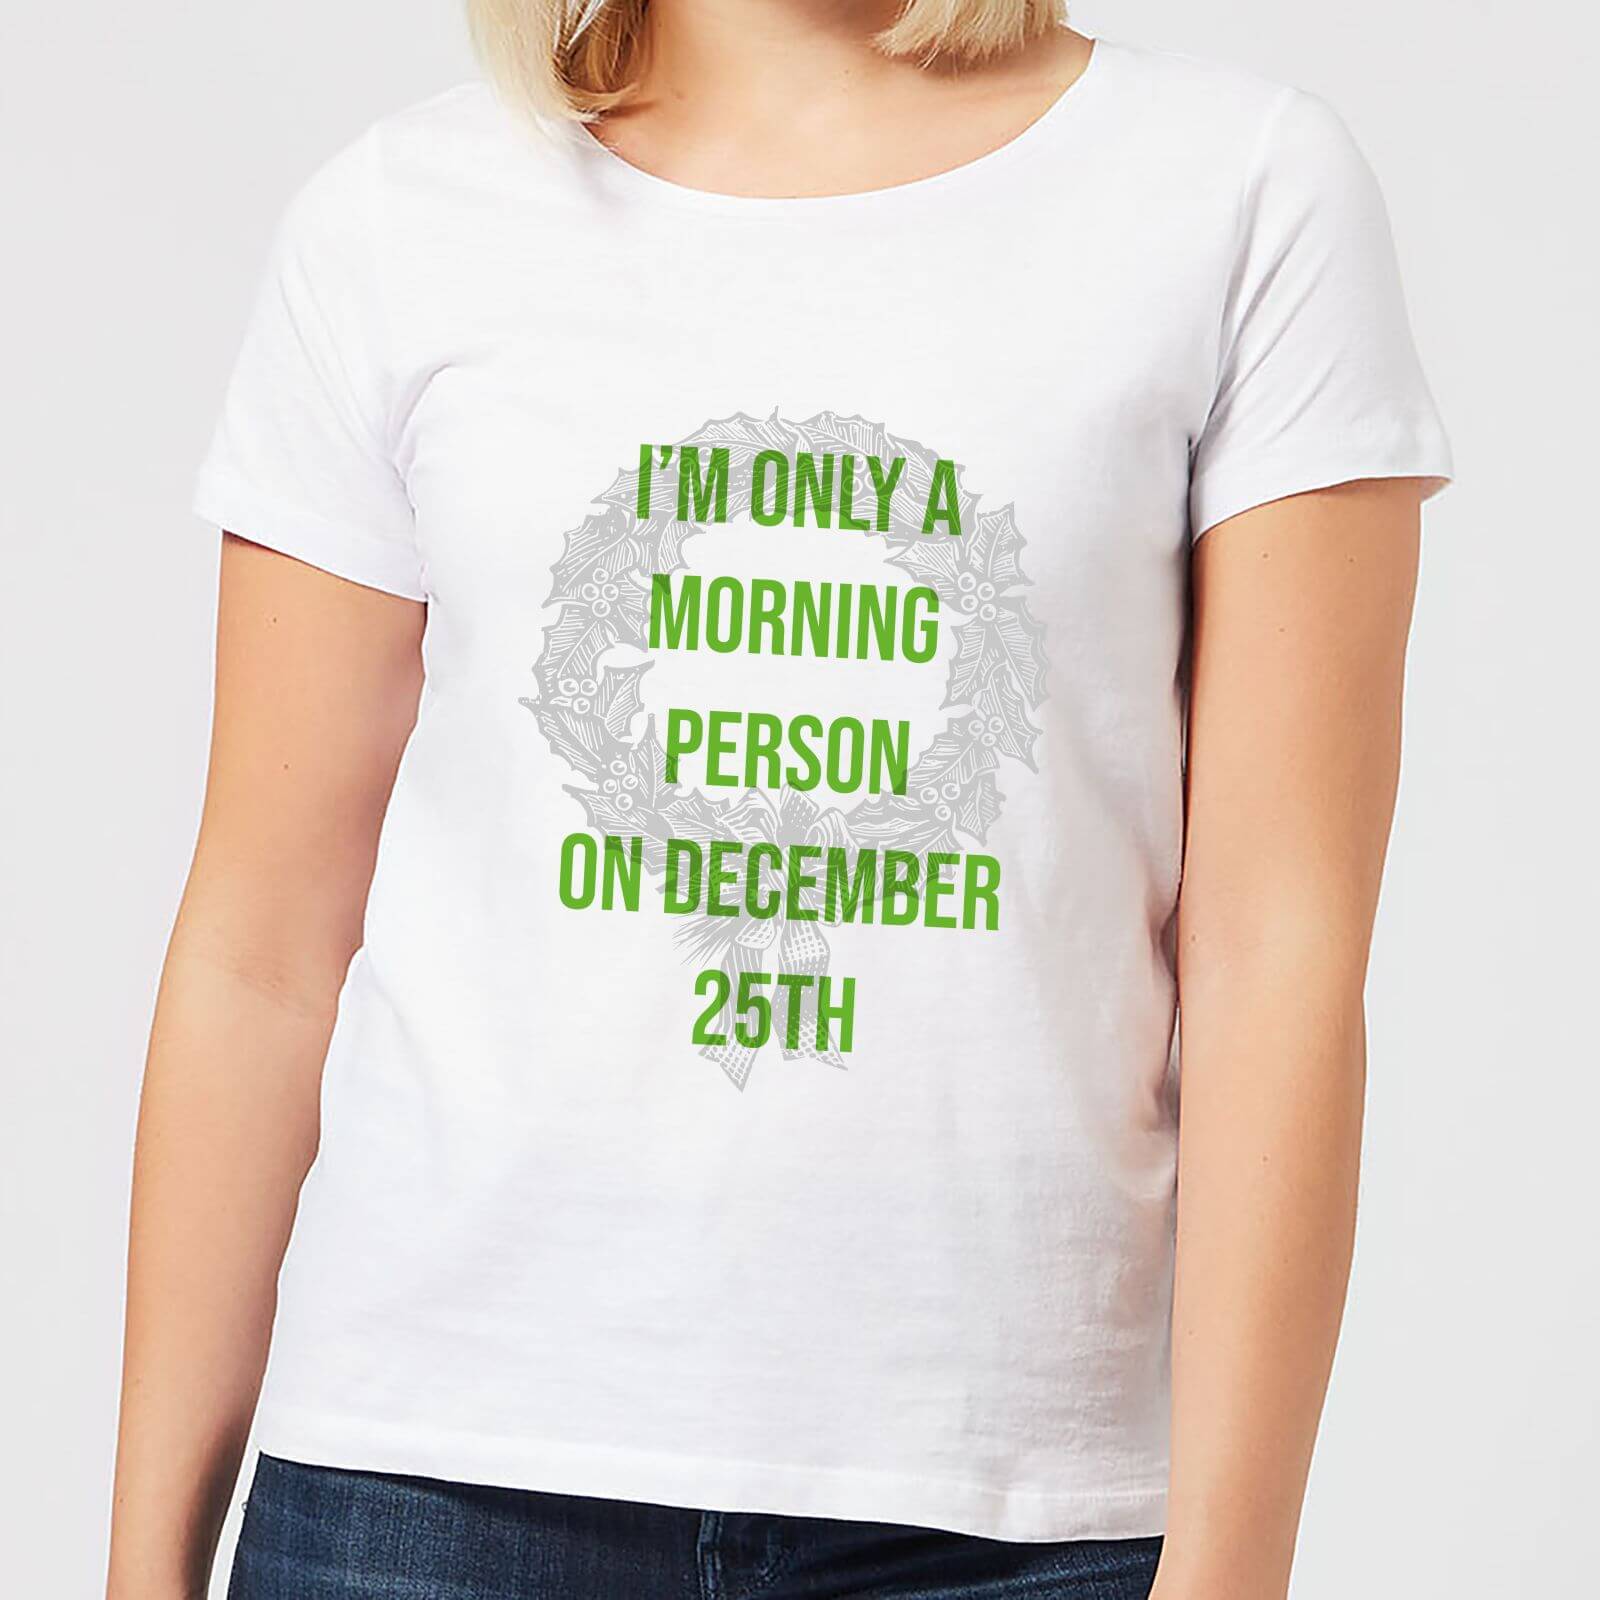 I'm Only A Morning Person On December 25th Women's Christmas T-Shirt - White - S - White